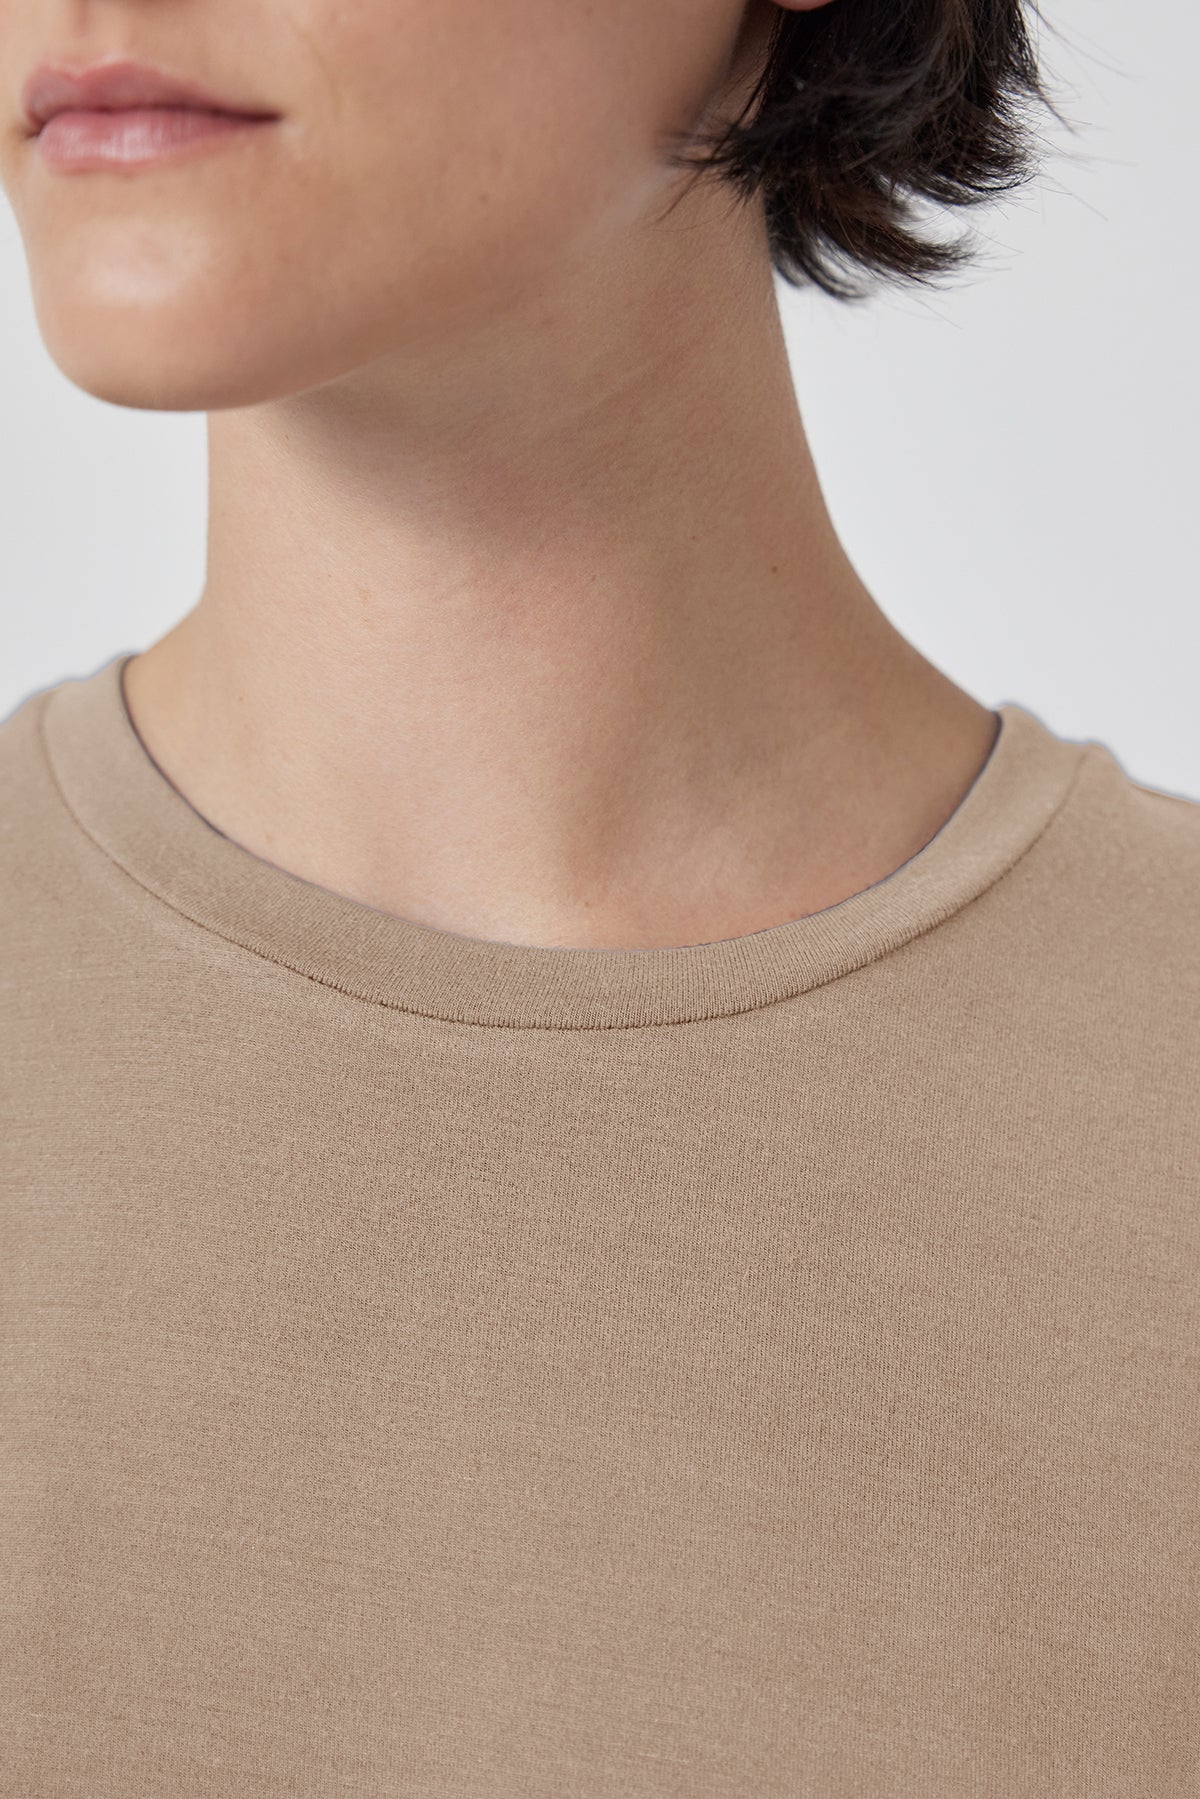 Close-up of a person wearing a Velvet by Jenny Graham Solana Tee, focusing on the neckline and shoulder area.-36290532376769